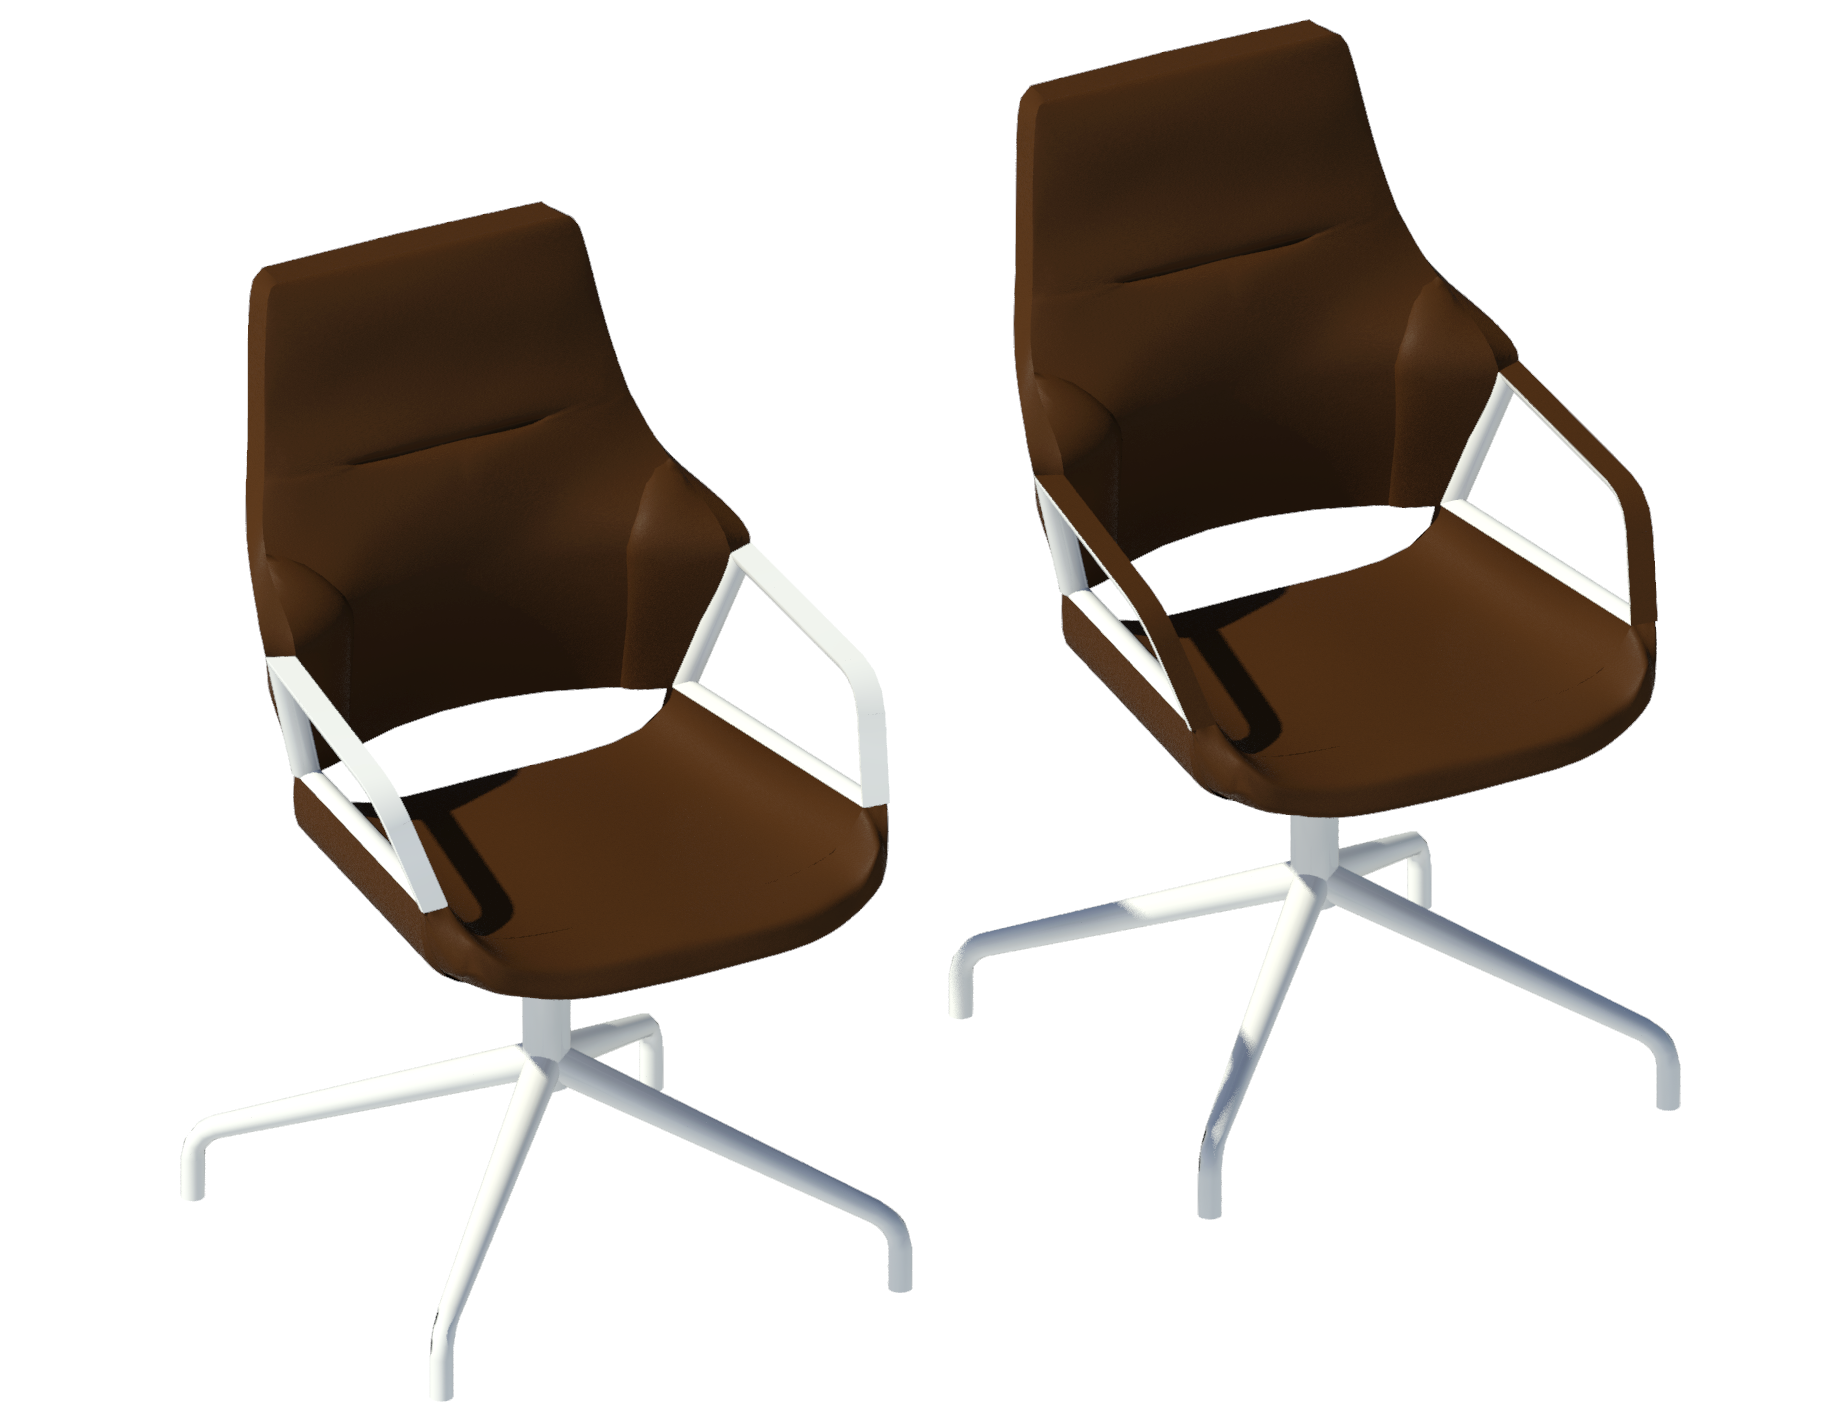 Revit content, Revit raytrace,  armrest material option, Wilkhahn executive conference chair, brown, frames, Kinship content